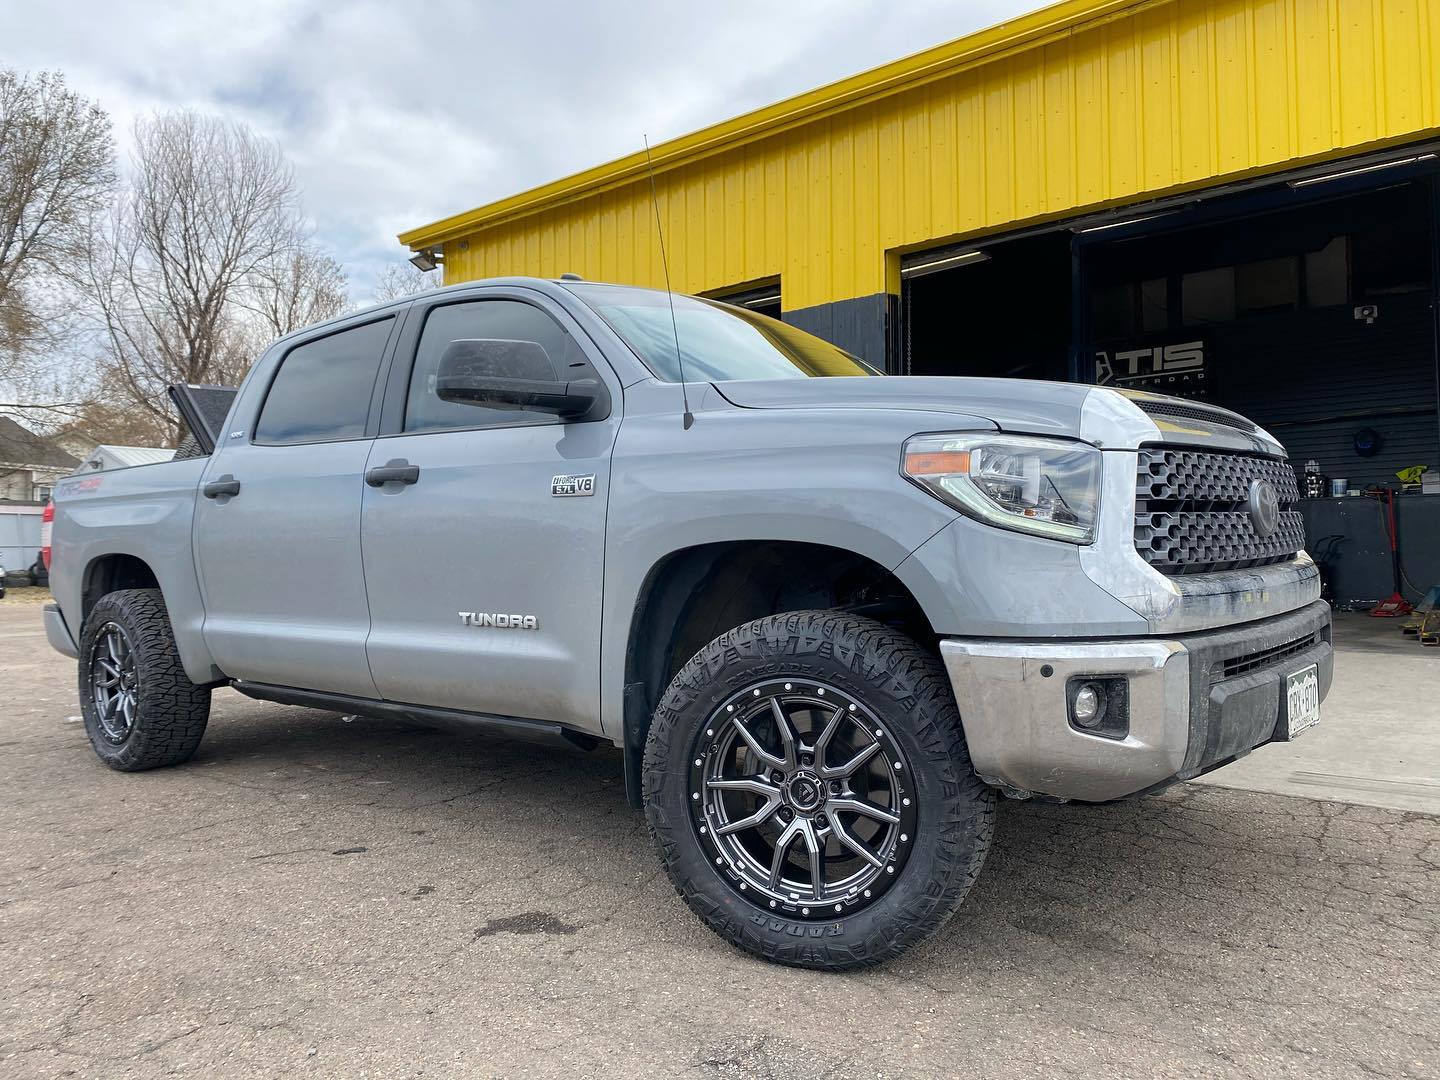 Toyota Tundra Grey Fuel OffRoad Rebel 5 D680 Wheel Front